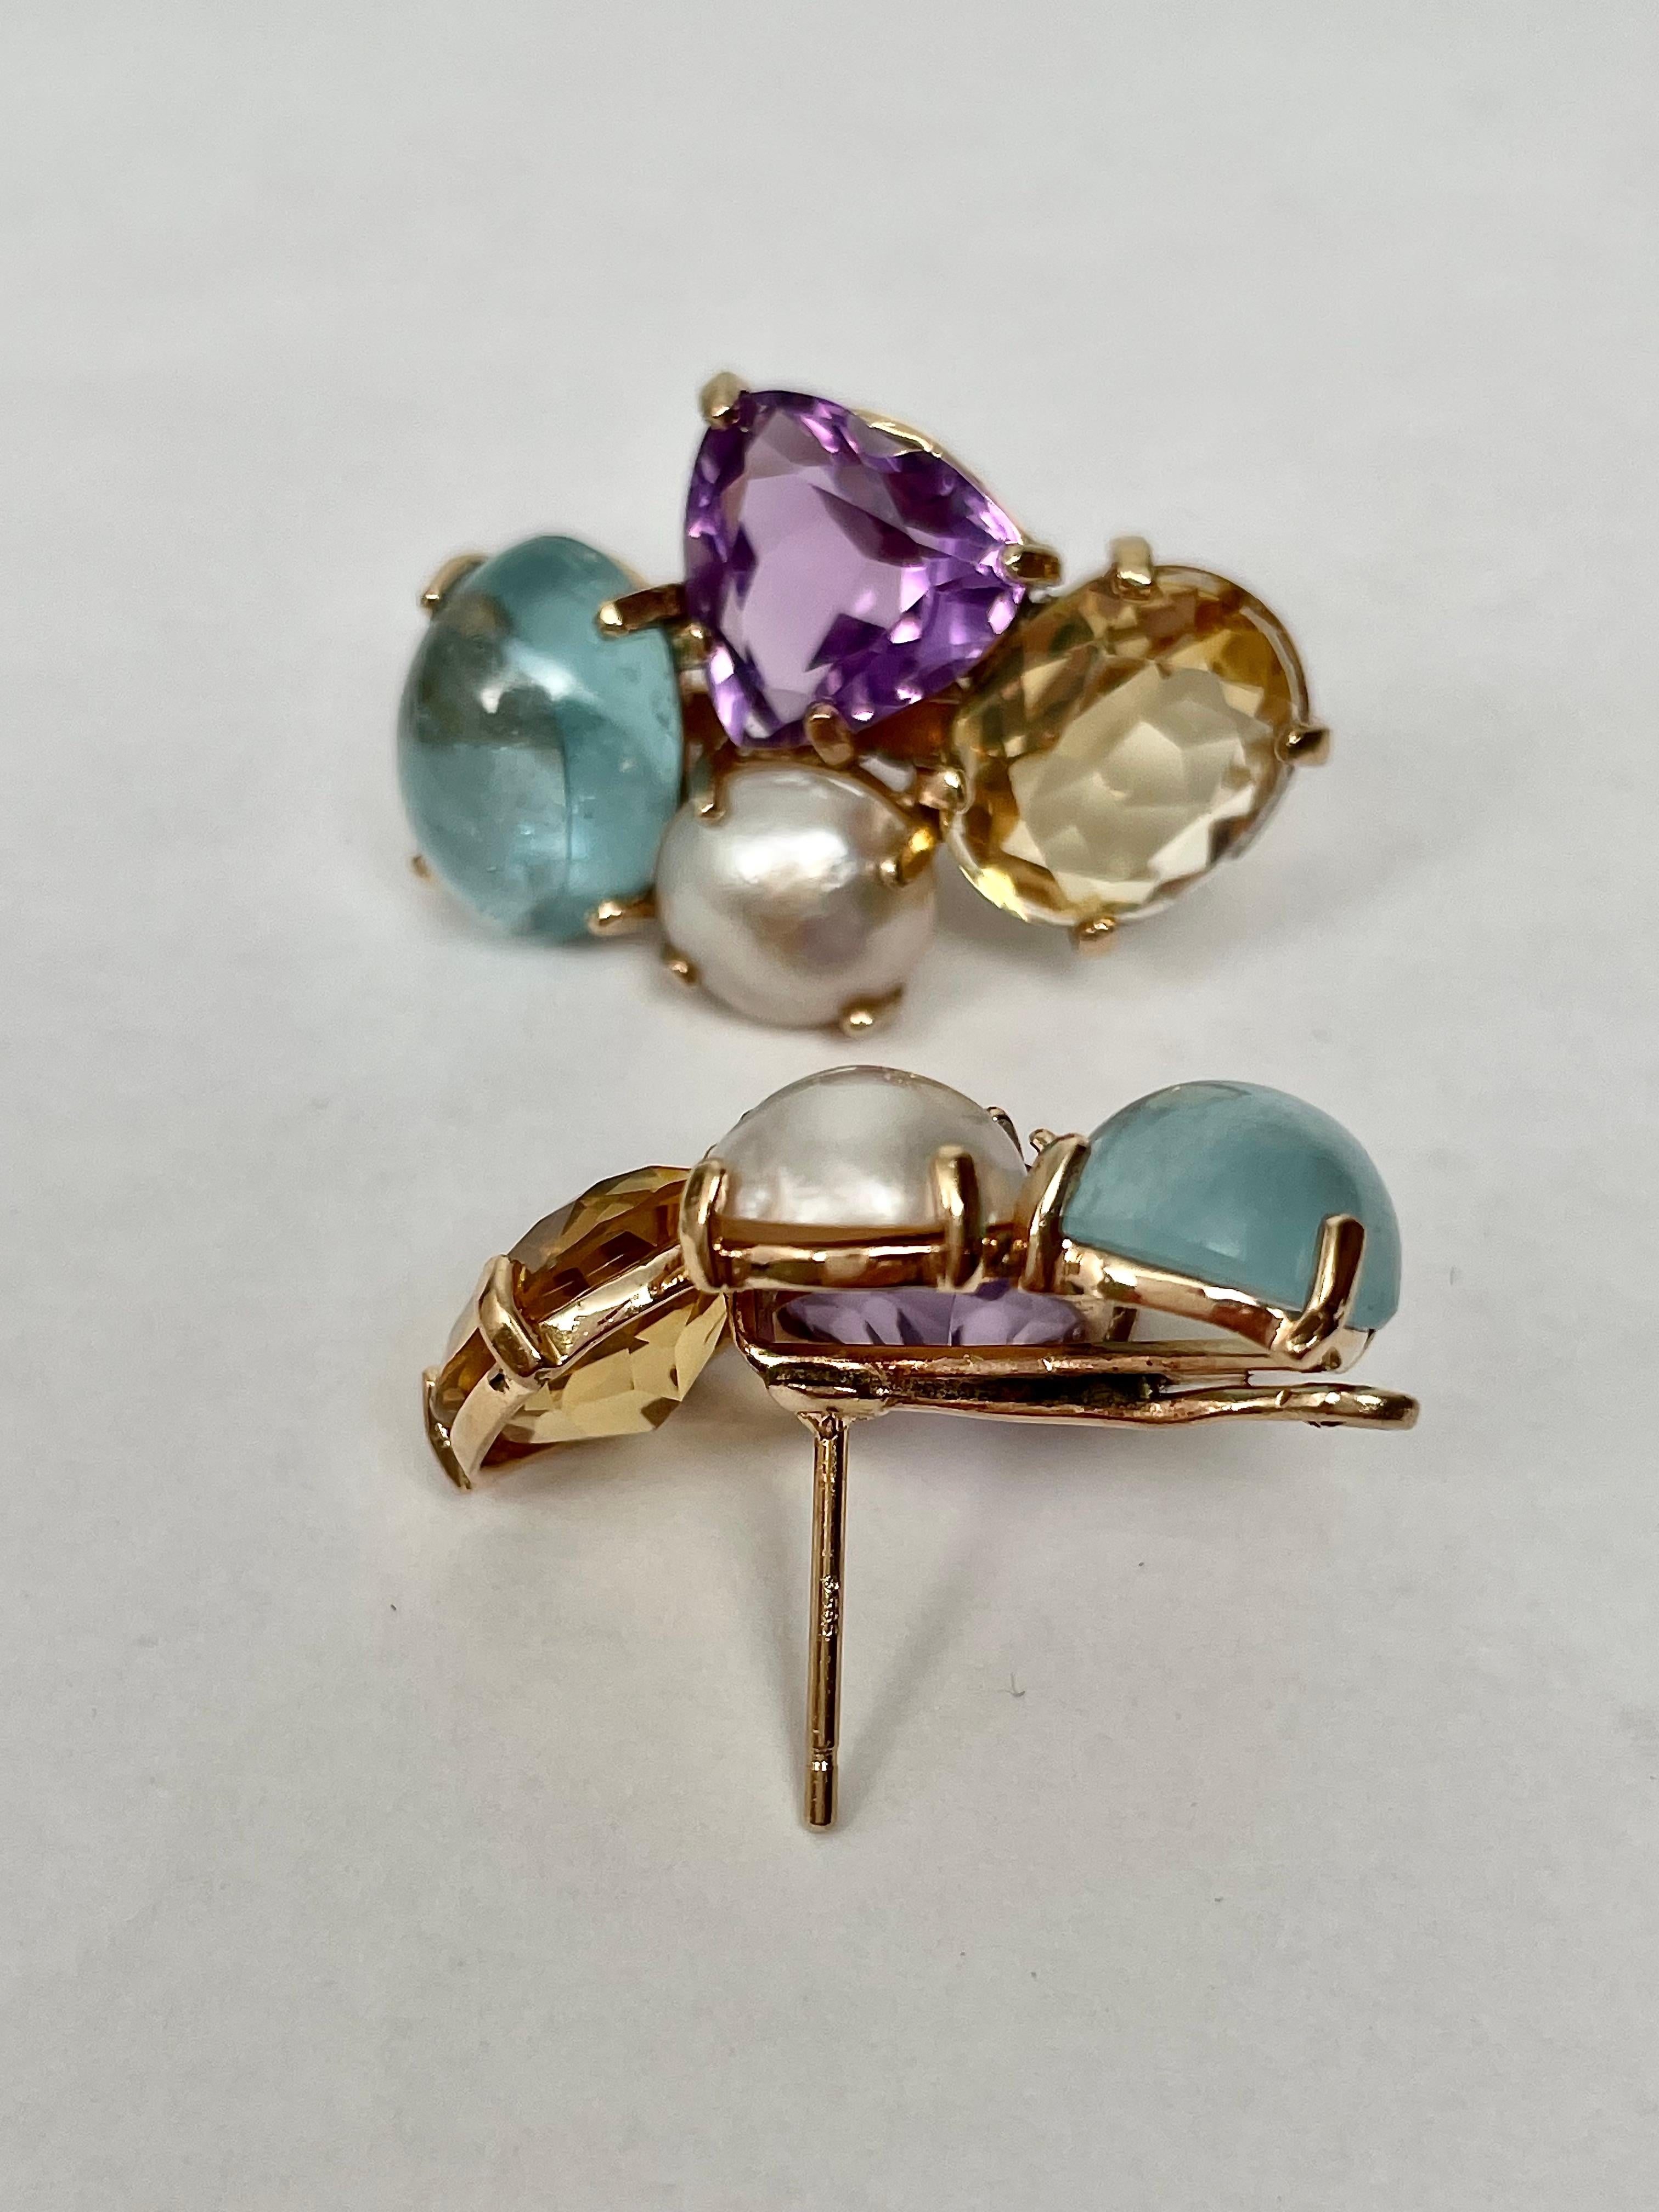 Custom made in 14kt. Yellow Gold  the Amethysts, Aquamarines, Citrines and Mabe Pearls are the focus of this multi-colored pair of earrings! The cluster of large gemstones are reminiscent of glamorous stars of the 1960's because they are actually